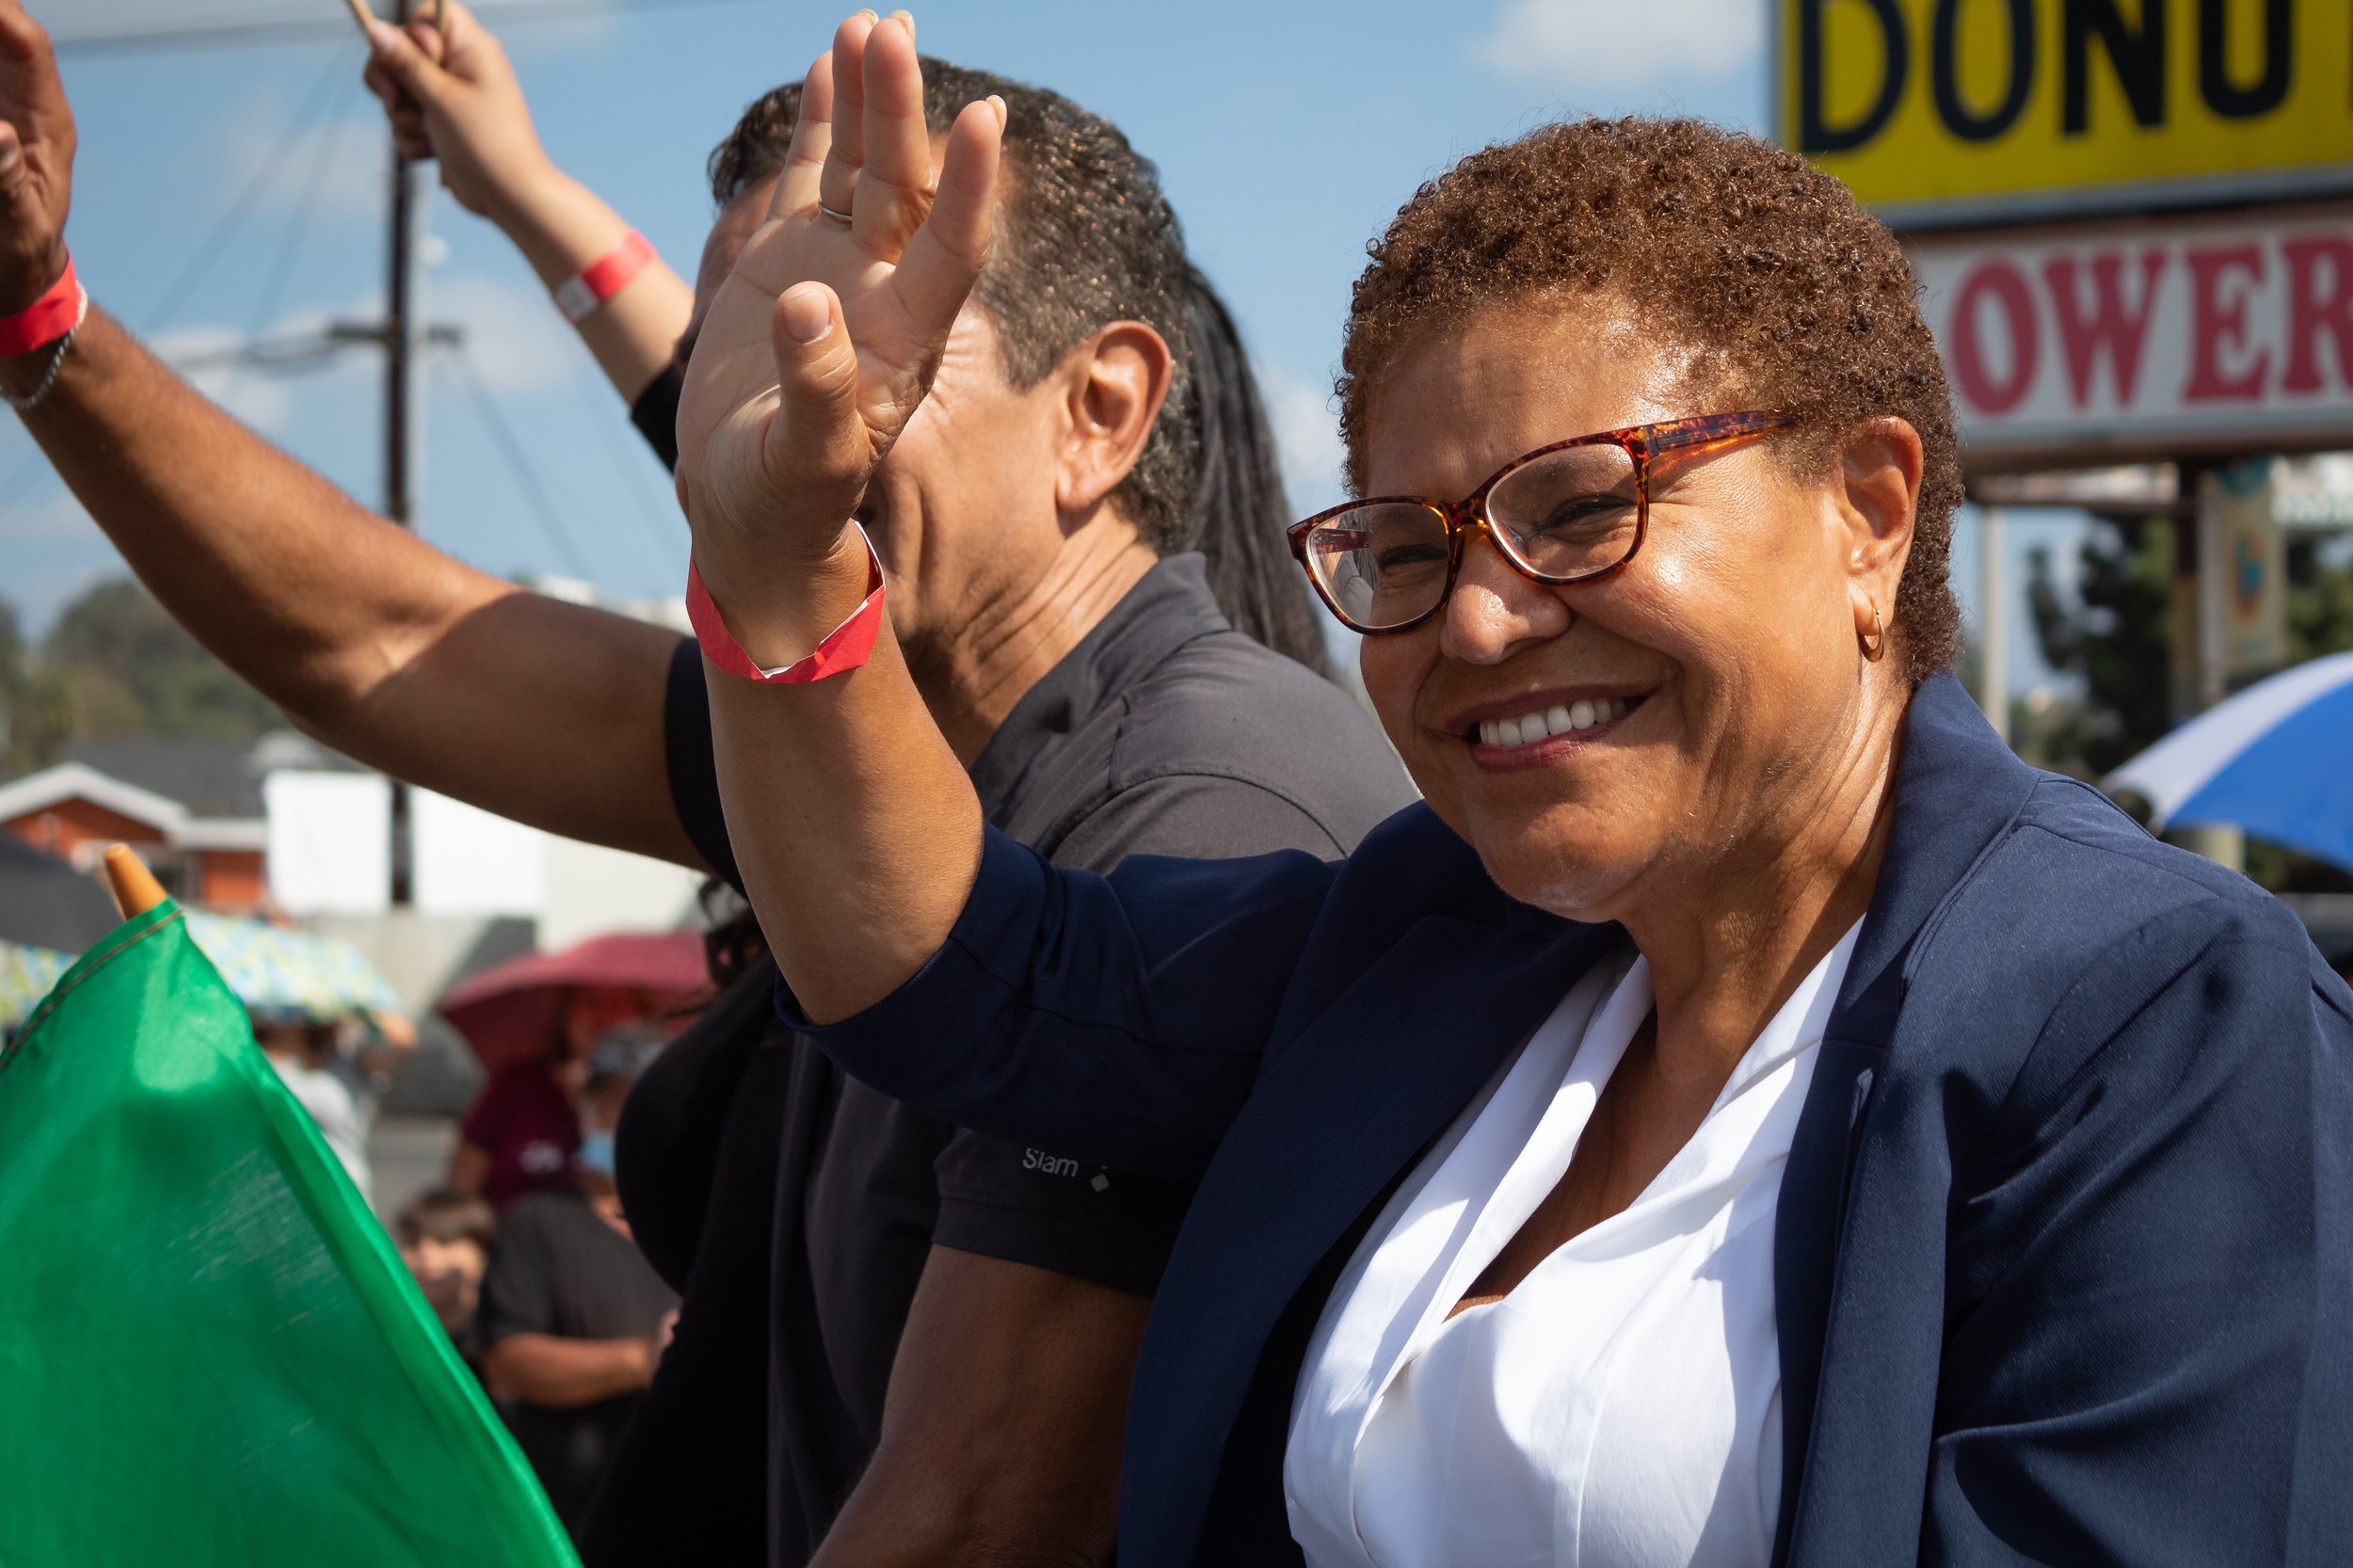  Los Angeles mayoral candidate Karen Bass waving to the crowd during the Mexican Independence Parade & Festival in East Los Angeles, Calif. on Sept. 18, 2022. (Caylo Seals | The Corsair) 